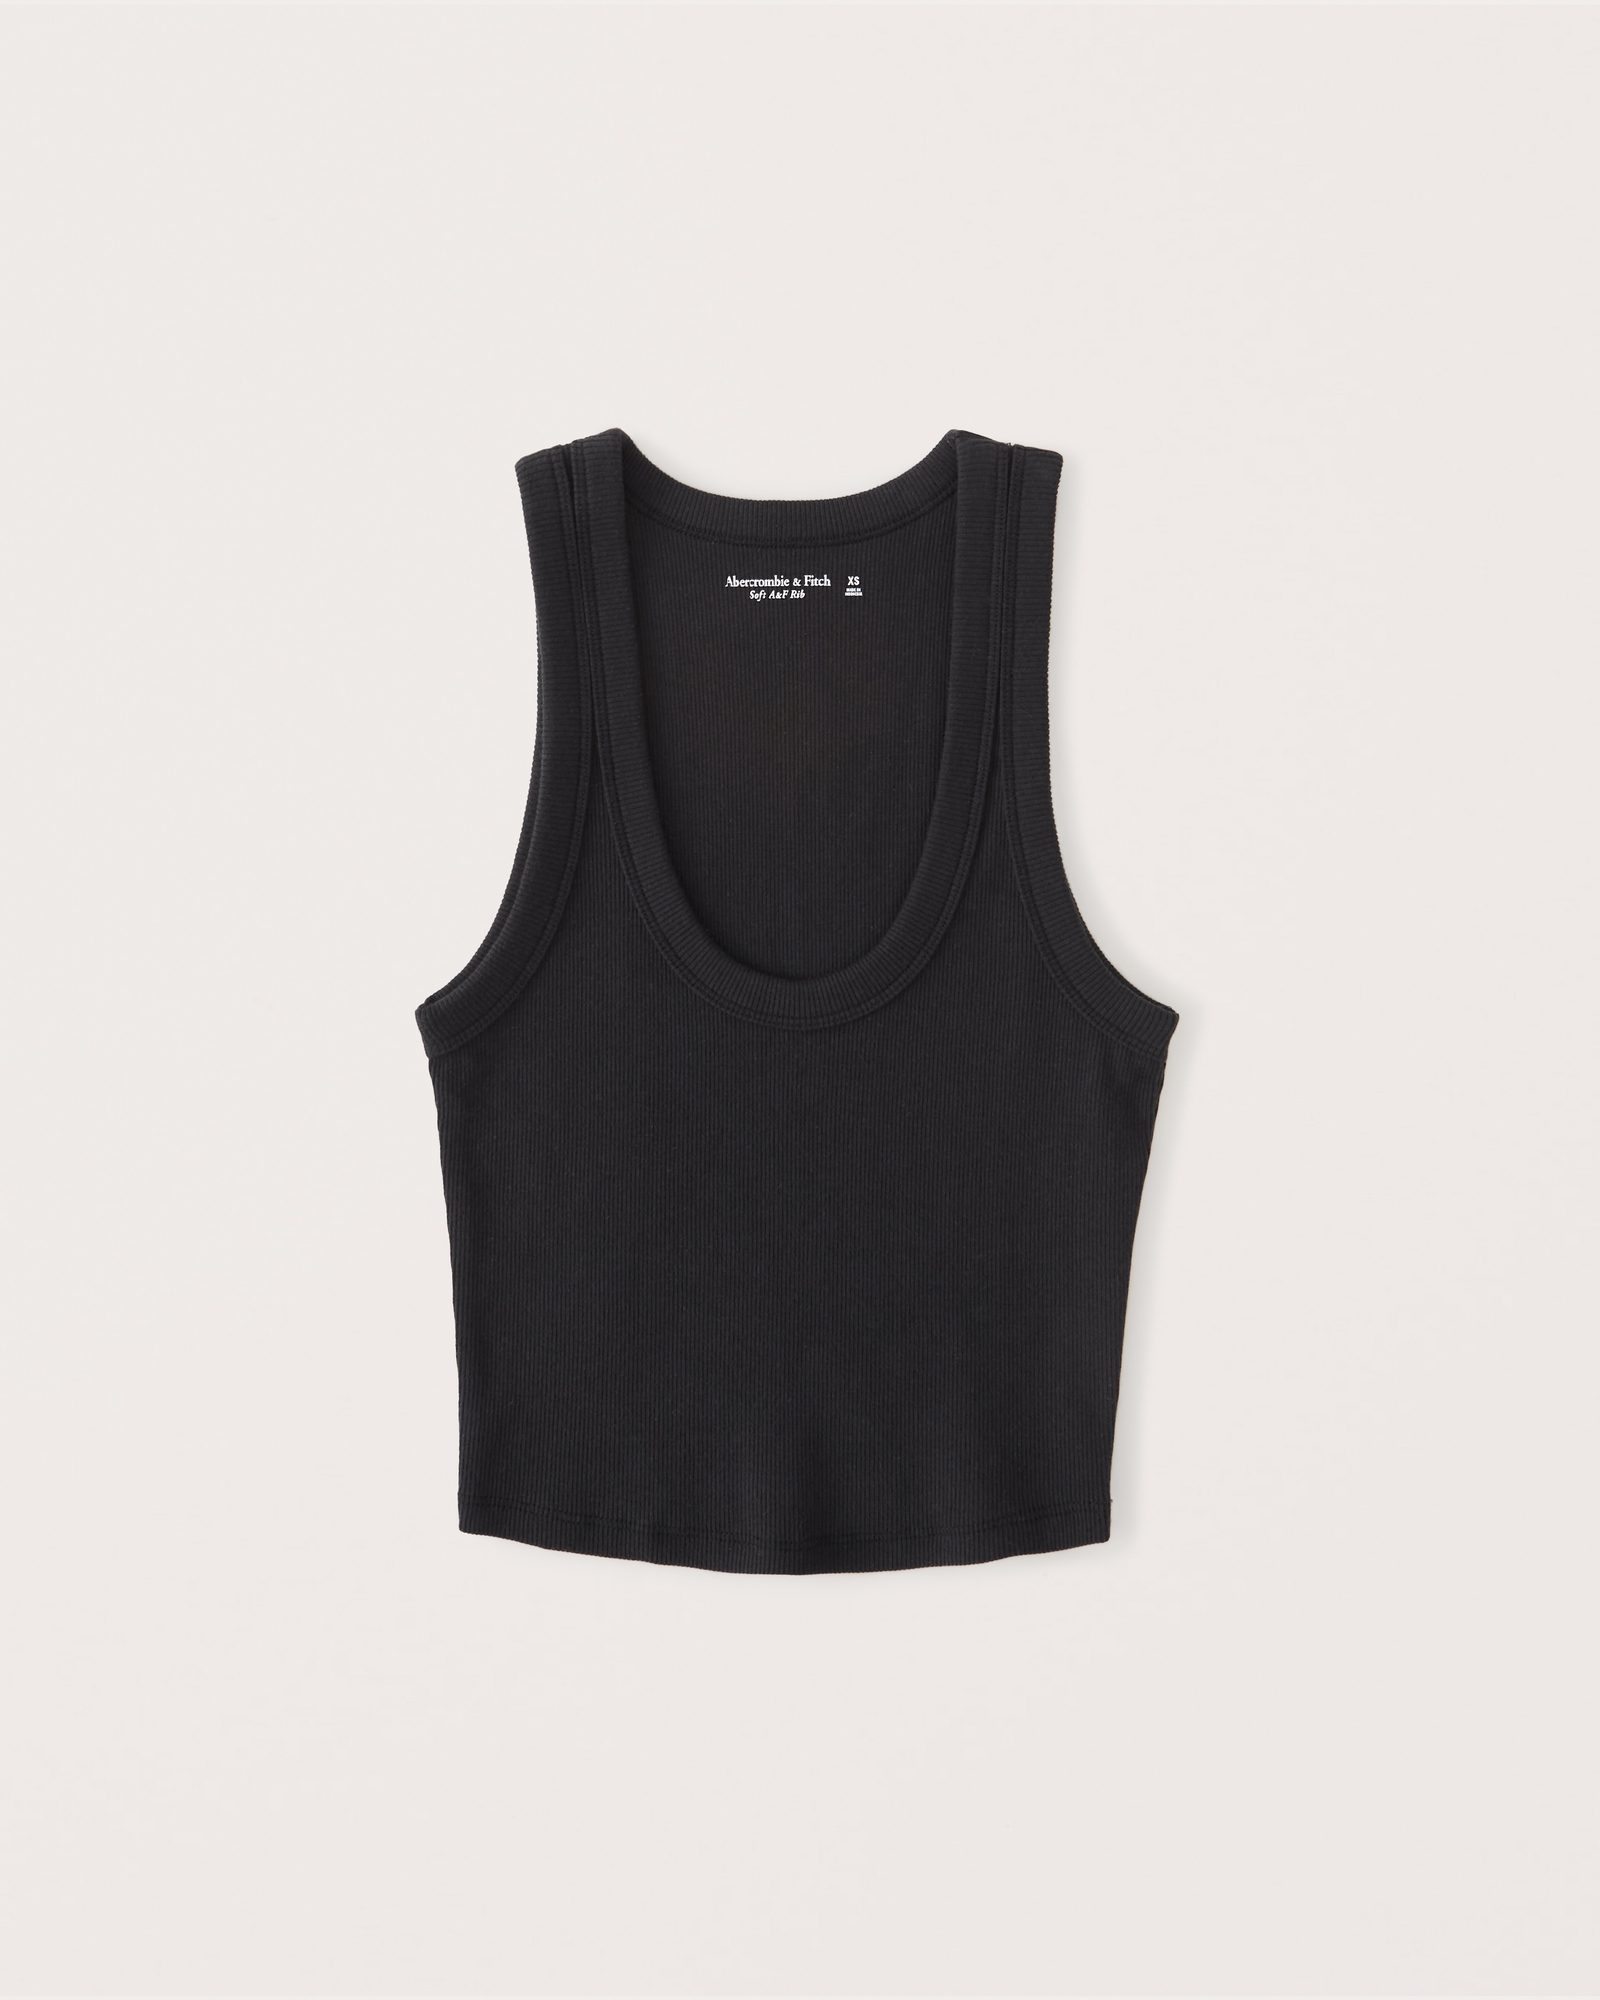 Abercrombie & Fitch Essential Scoopneck Tank I Editor Review